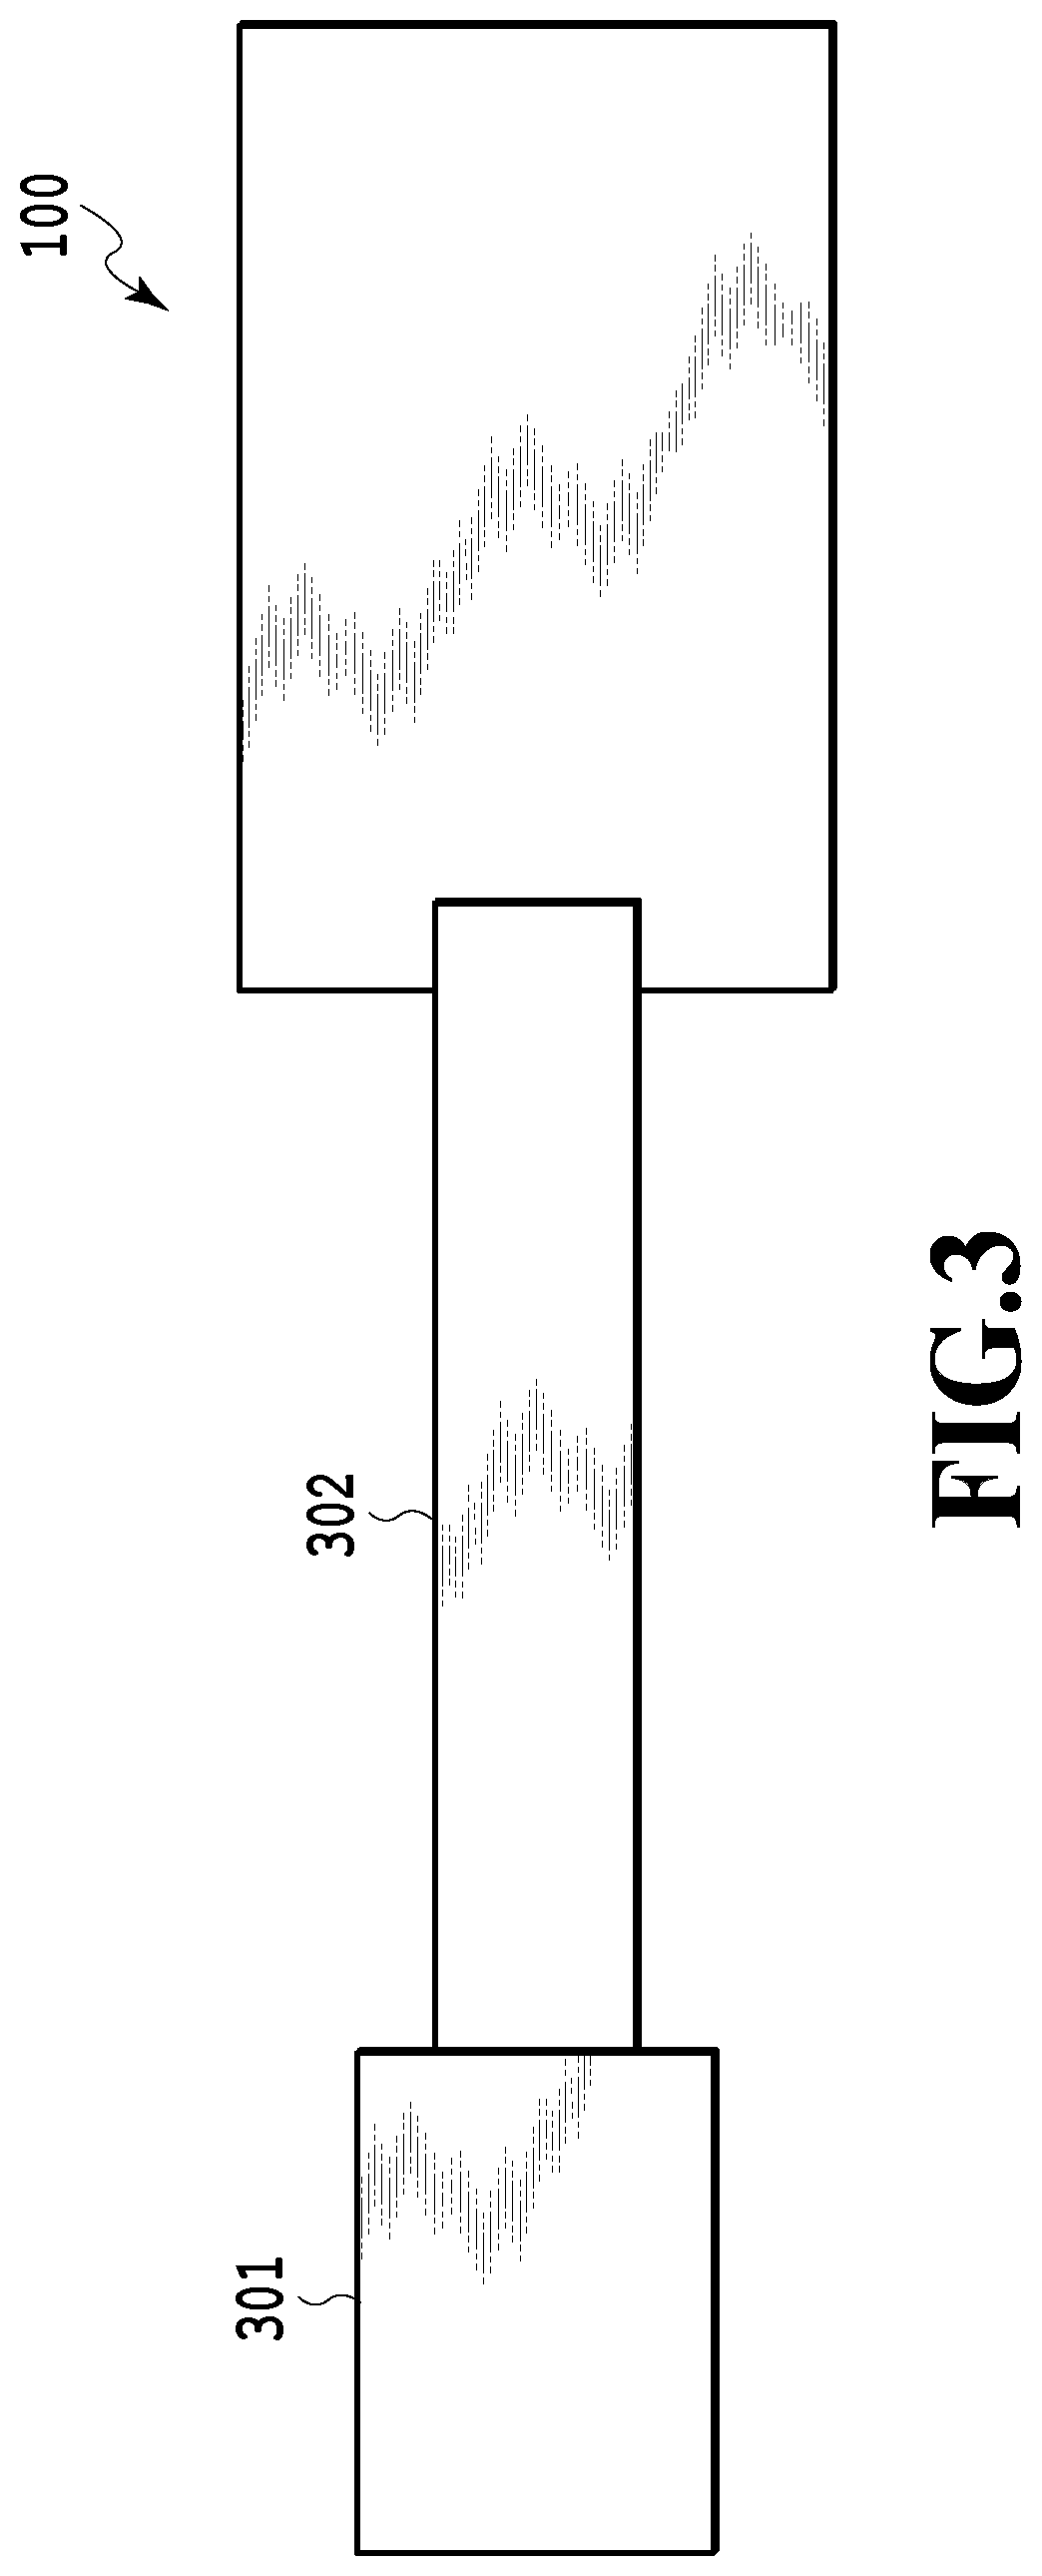 High-frequency transmission line and optical circuit